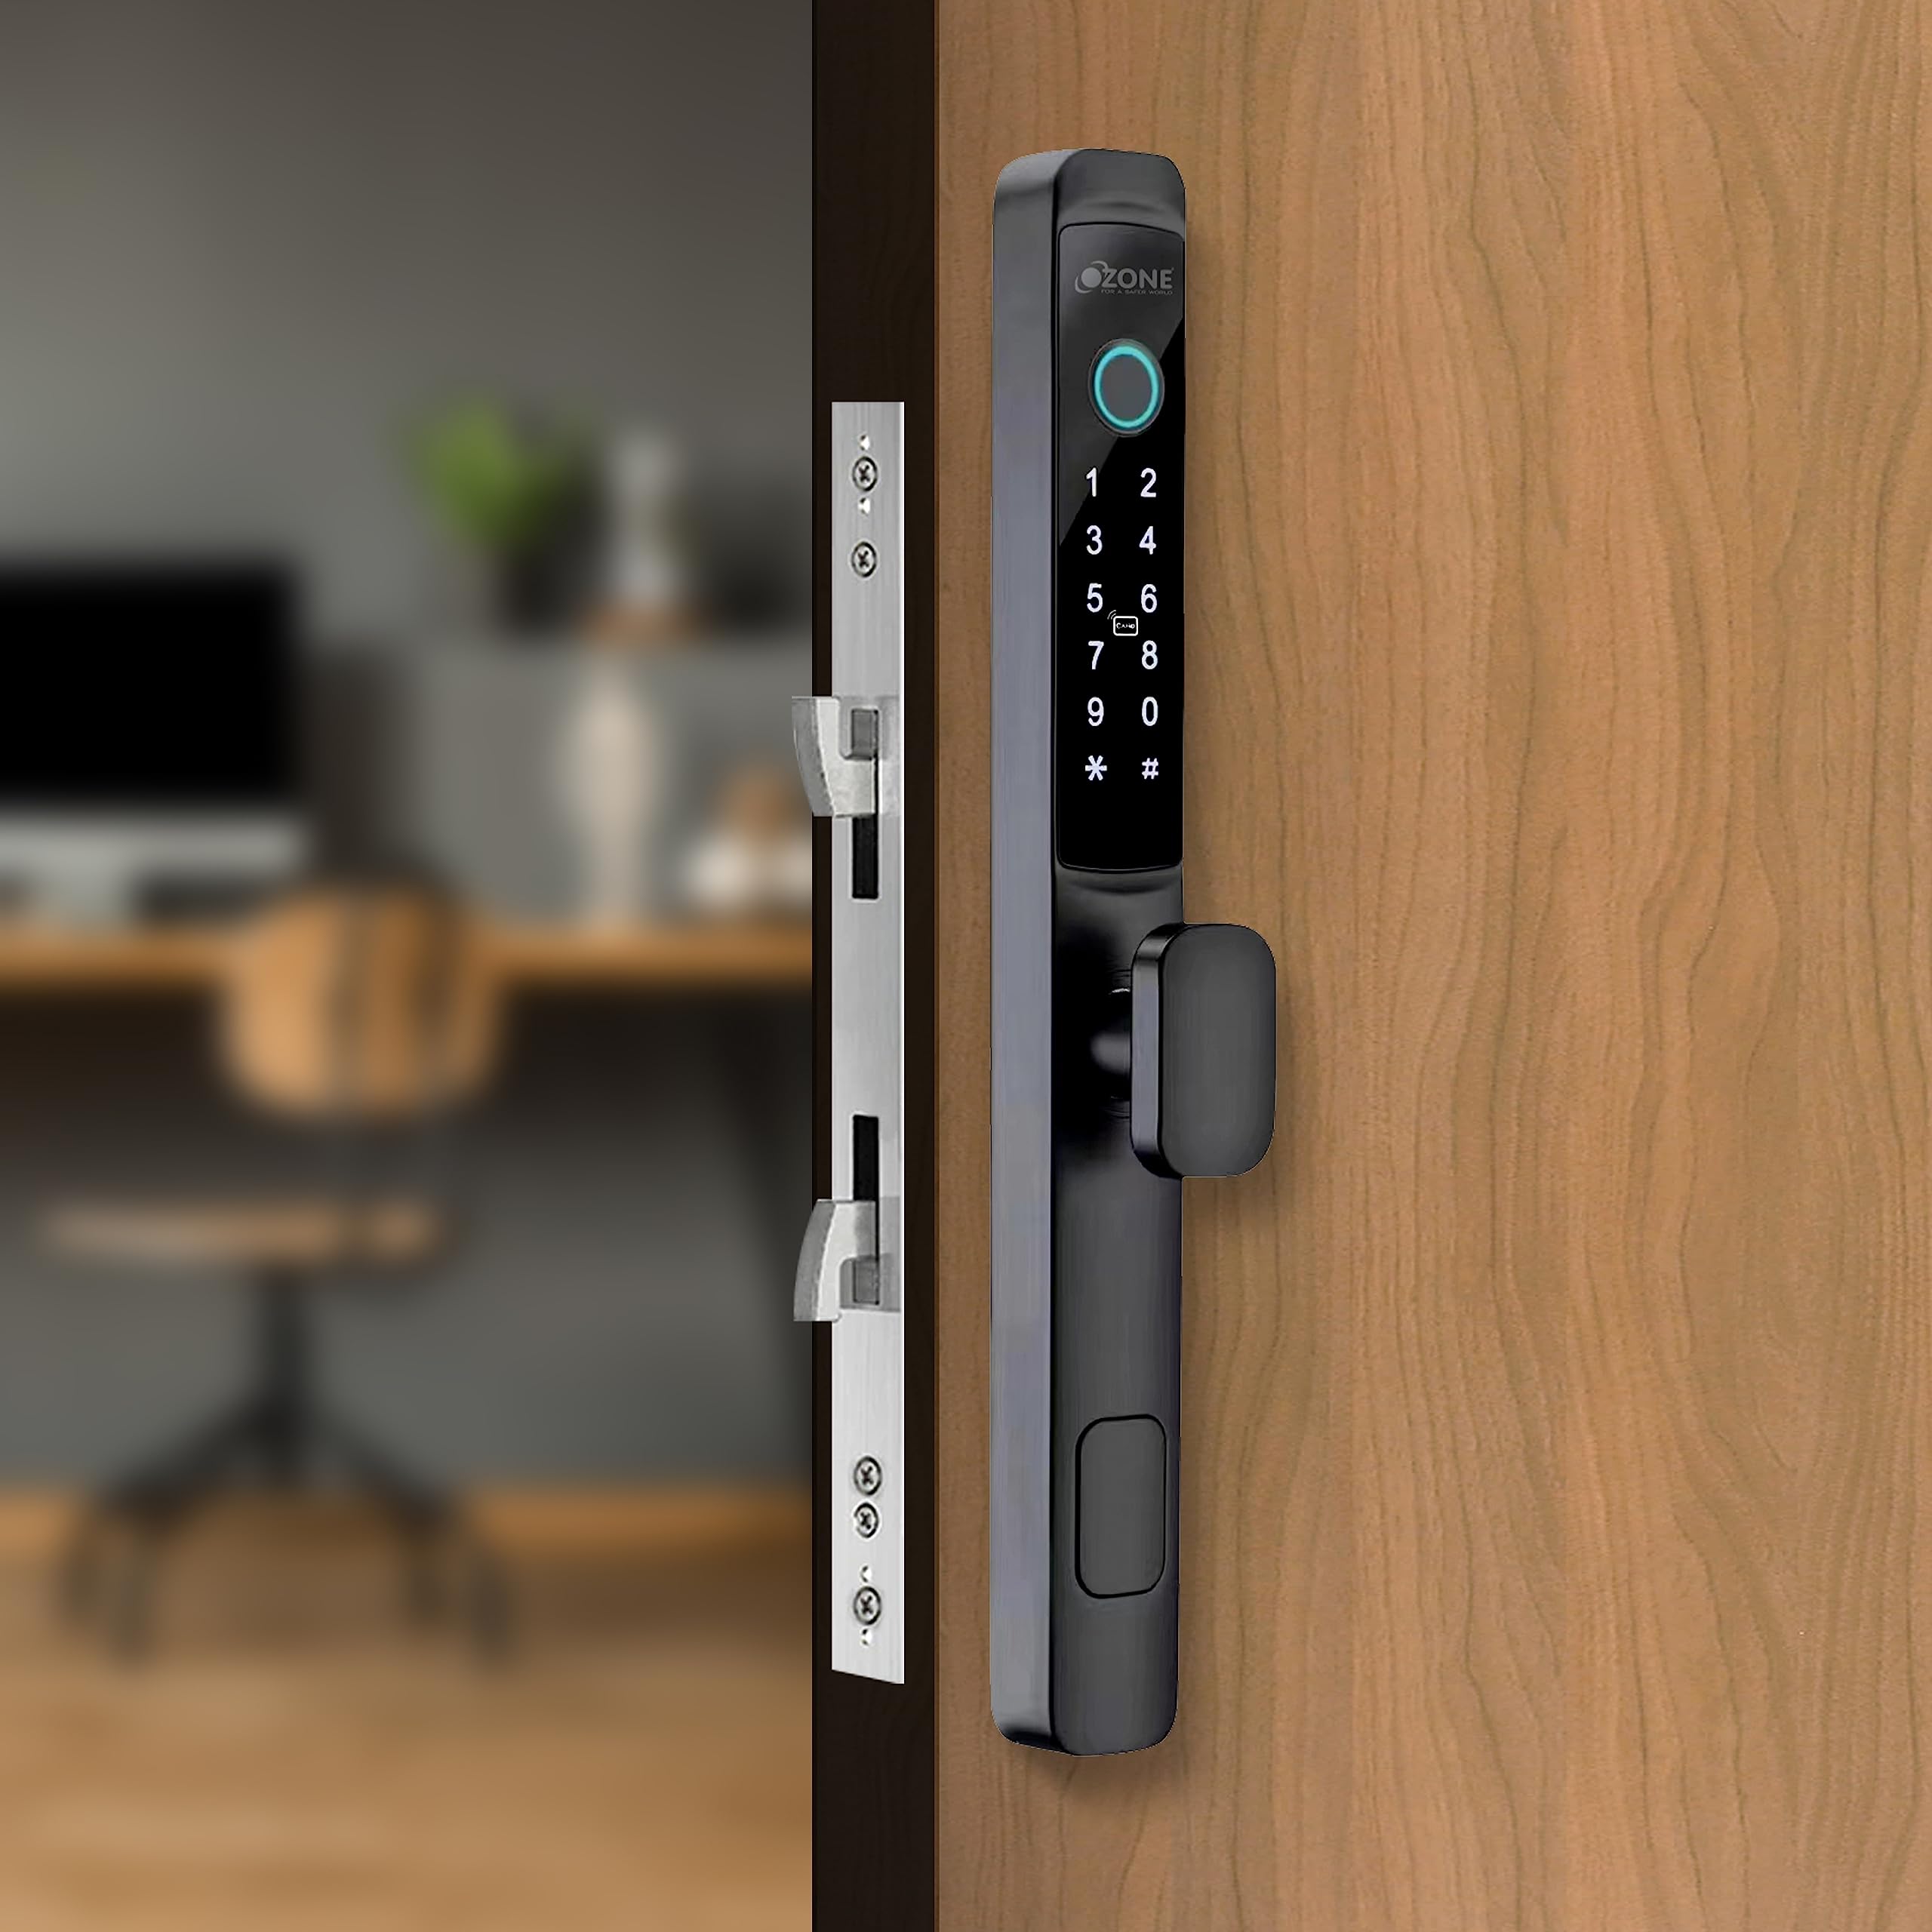 Ozone Narrow Style Wi-Fi Smart Lock with 5-way access for Swing & Sliding Doors | Door Thickness: 35-80 mm